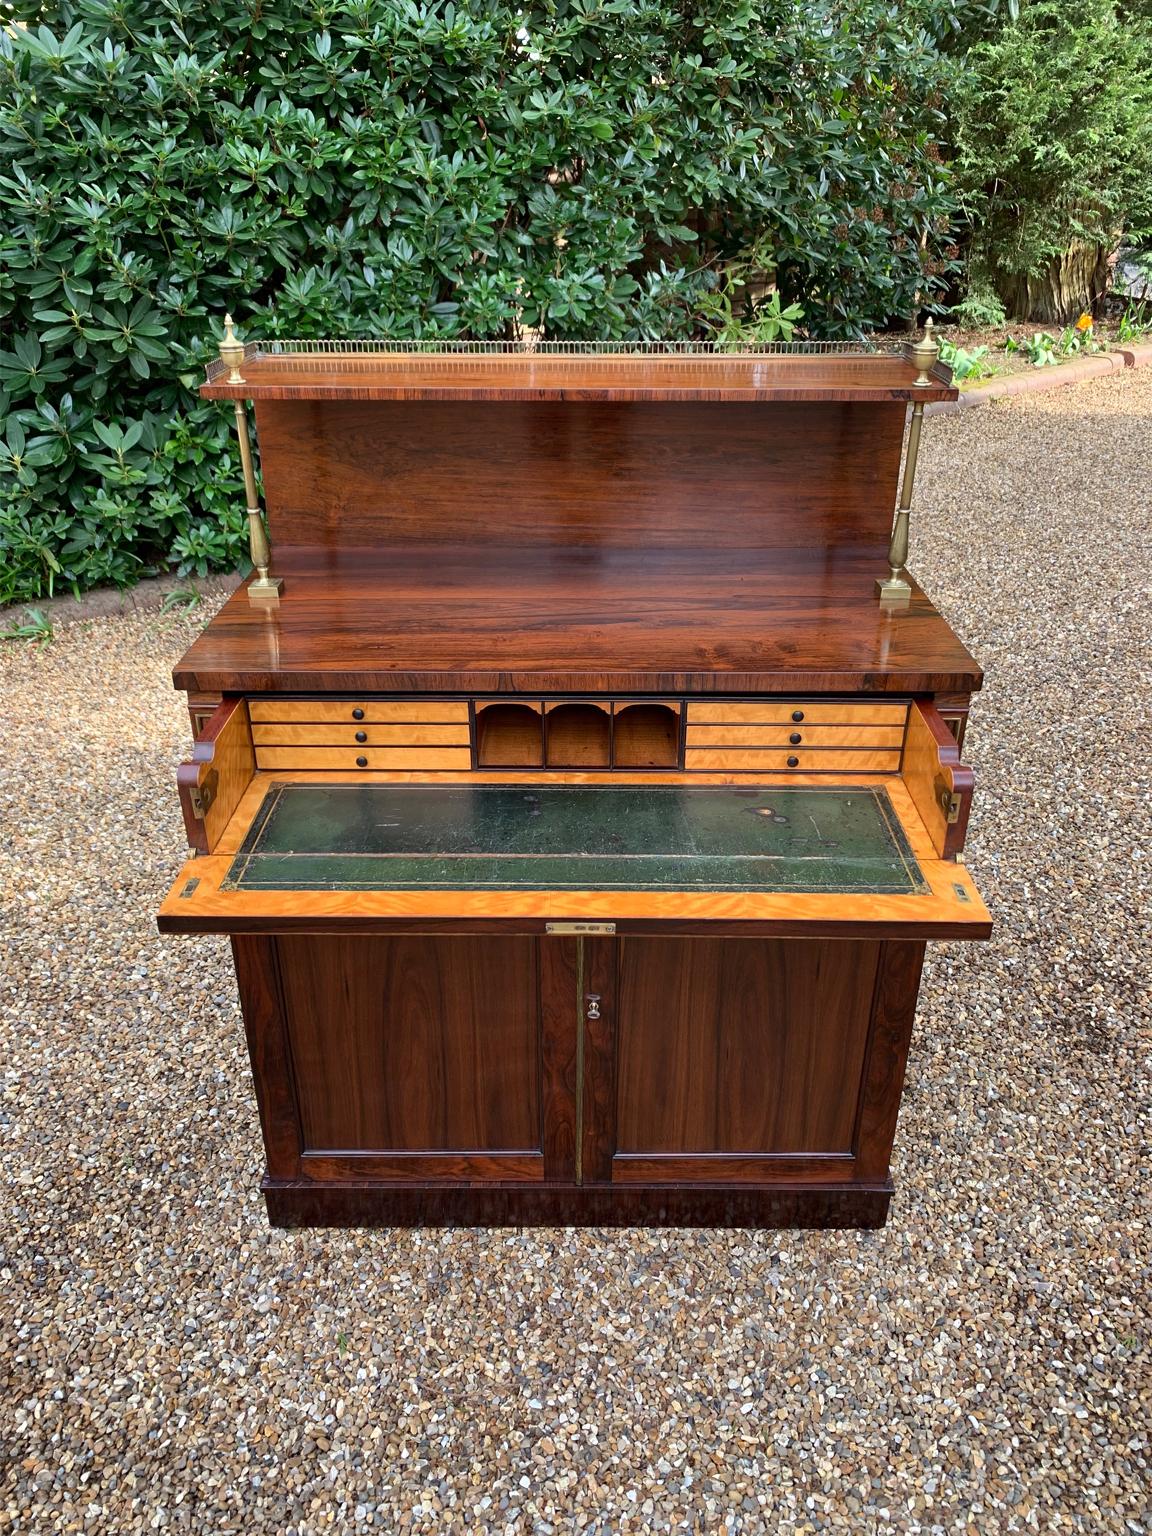 19th Century Regency Rosewood Secrétaire Chiffonier, supported by baluster brass columns, brass galleried ledge over the single secretaire drawer with lion brass ringed handles, fitted satinwood interior, leathered writing surface, three pigeon